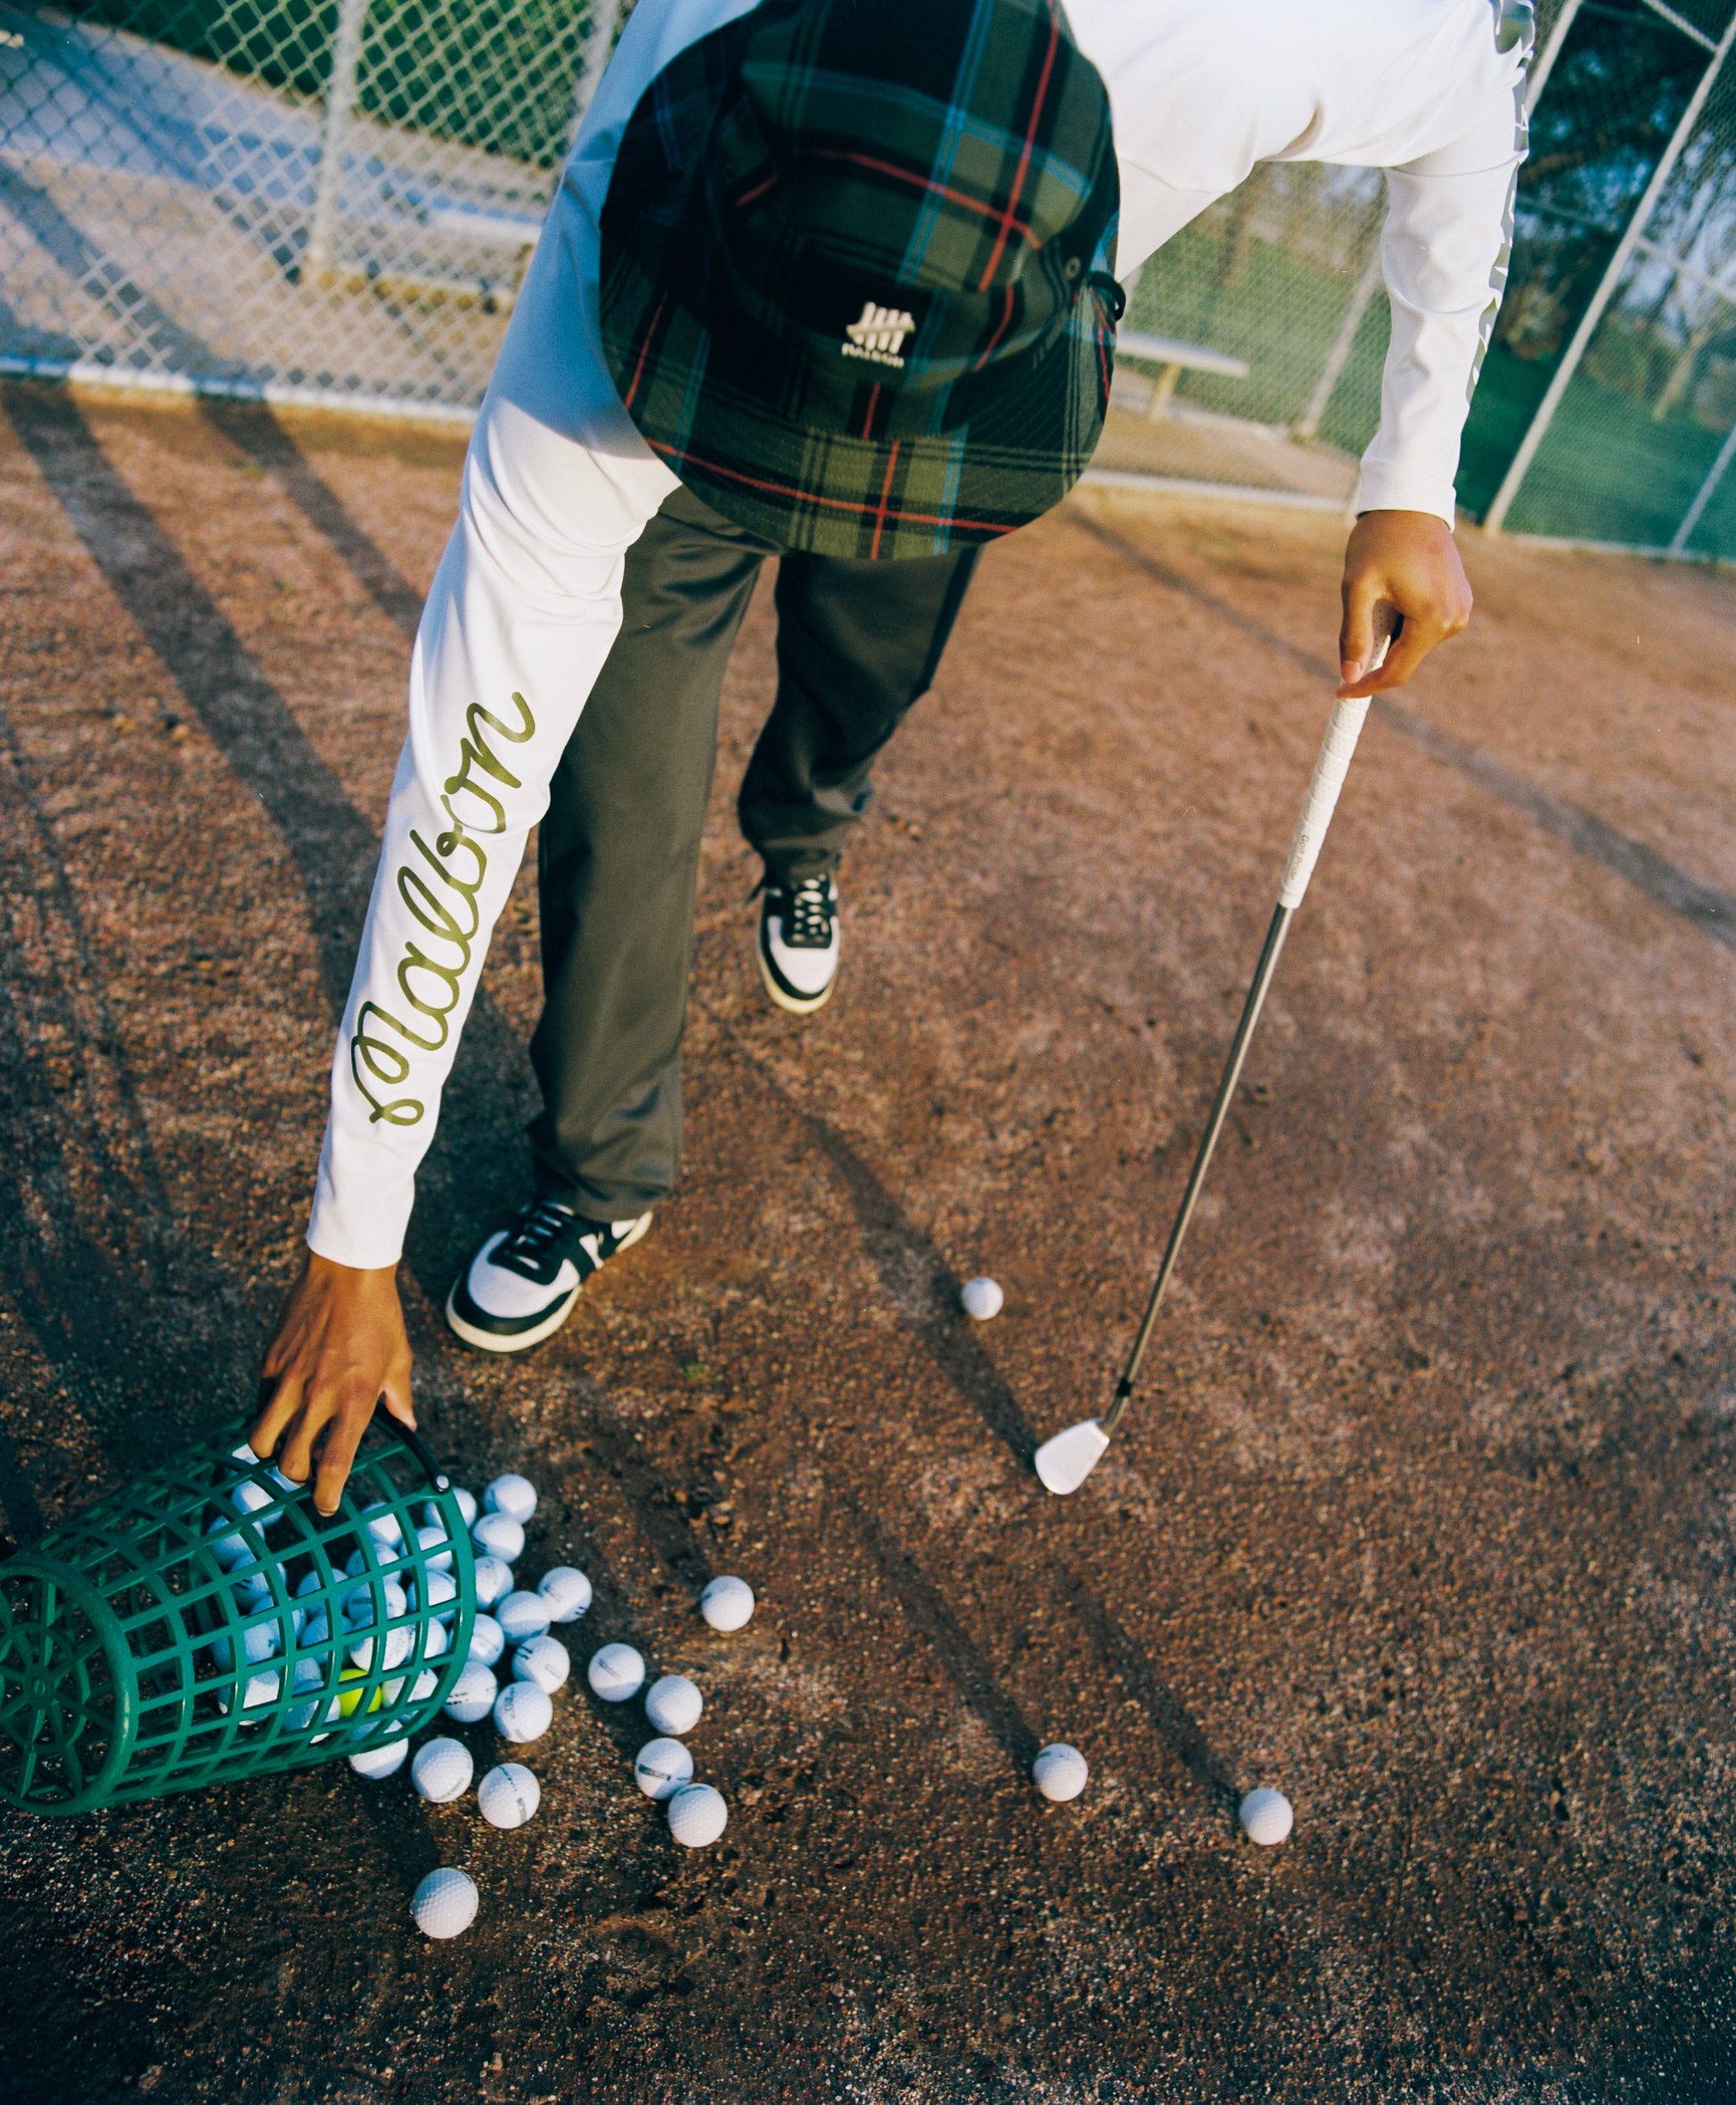 5 Leading Brands Merging Streetwear With Golf